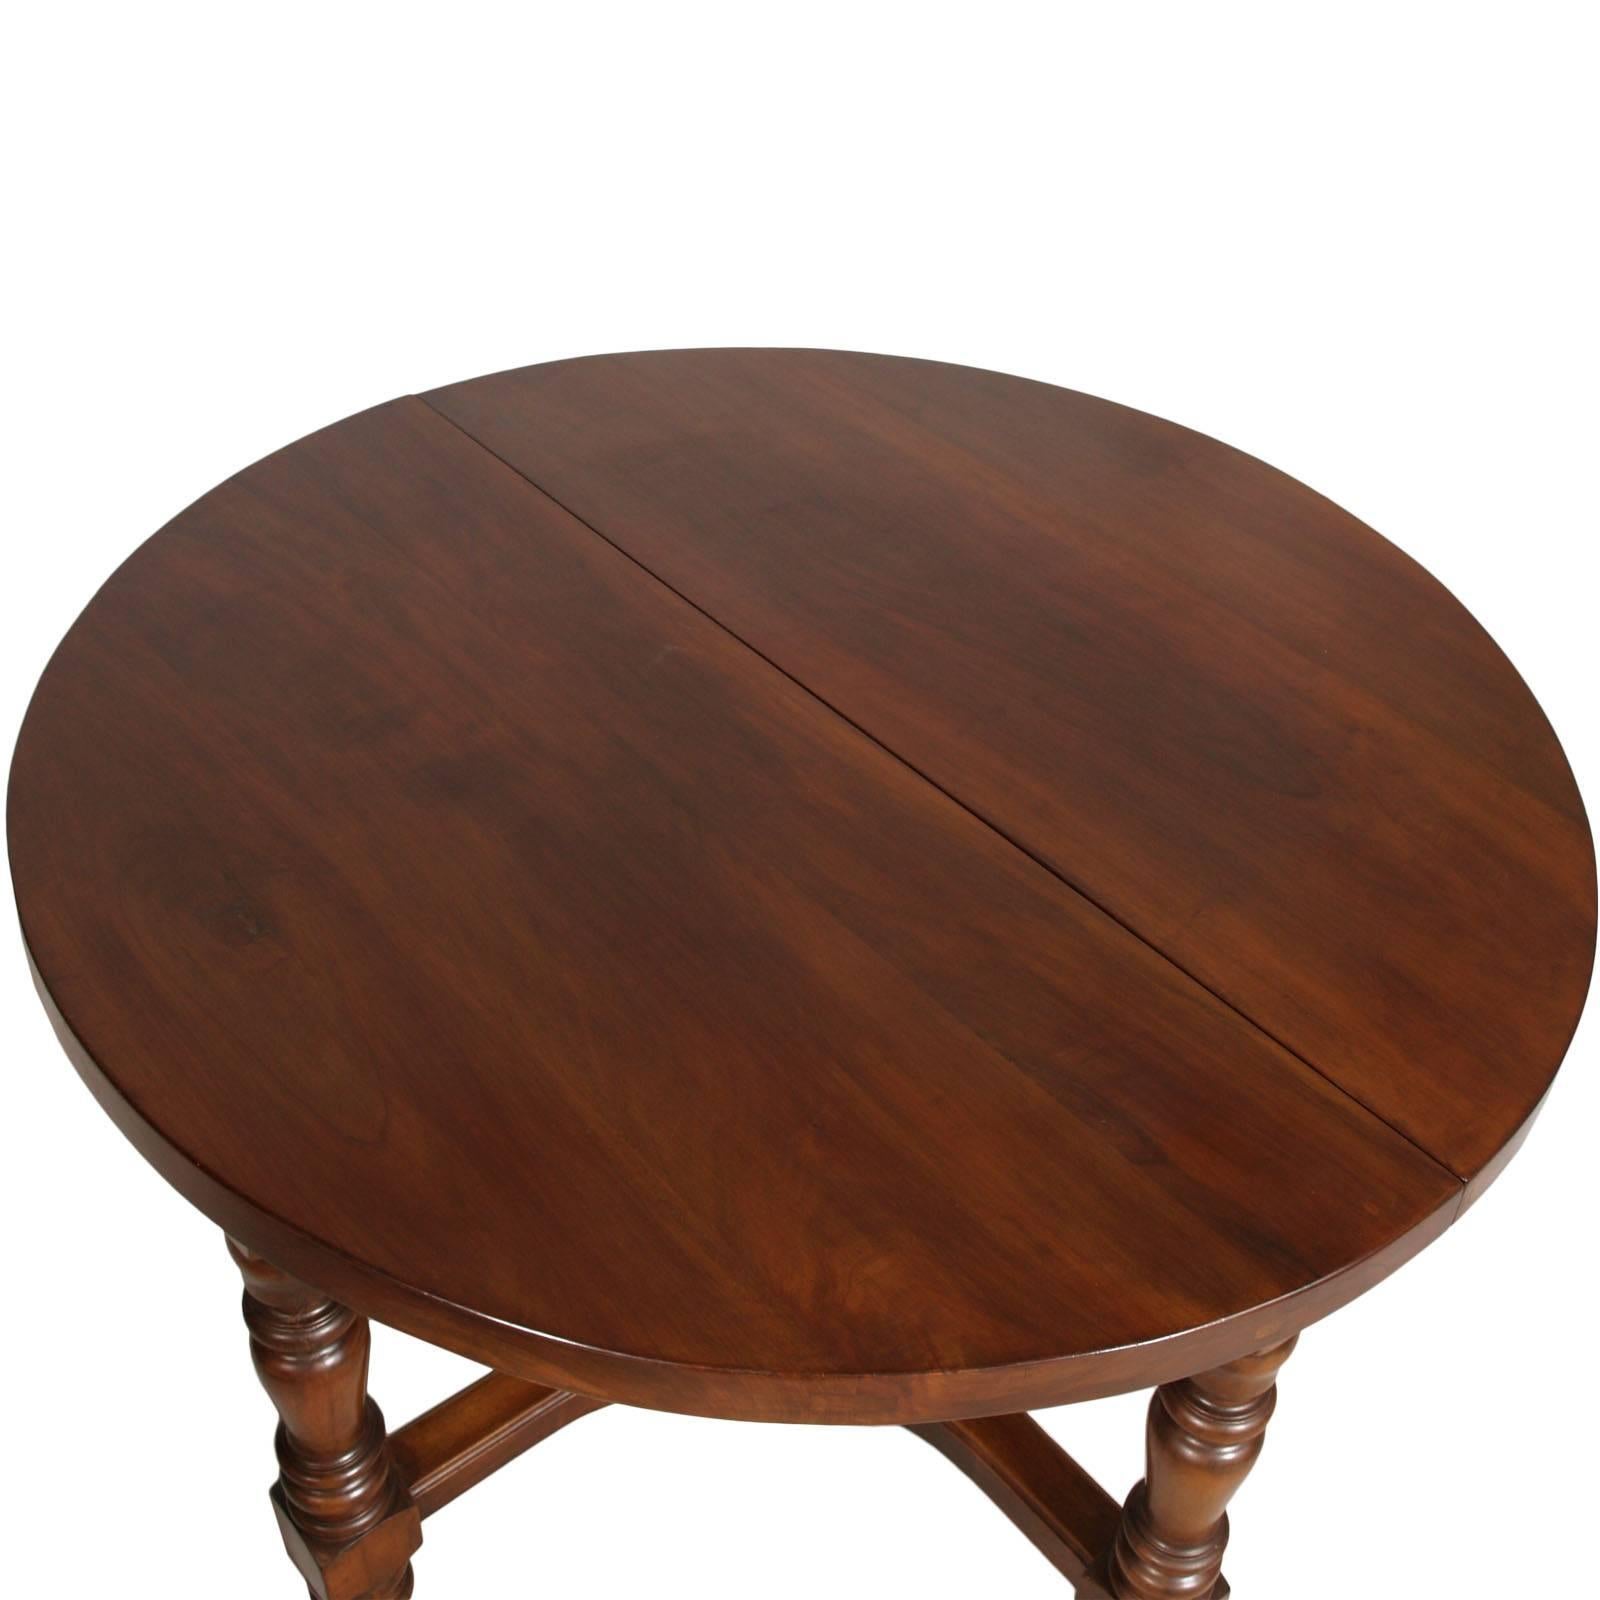 Italian circa 1880s round extendable table, Baroque Renaissance style, in very solid walnut, wax polished. Bassano handicraft production. Thickness of the top 6 cm. All connections with grafts and wood nails. Solid massive table weighing over 90